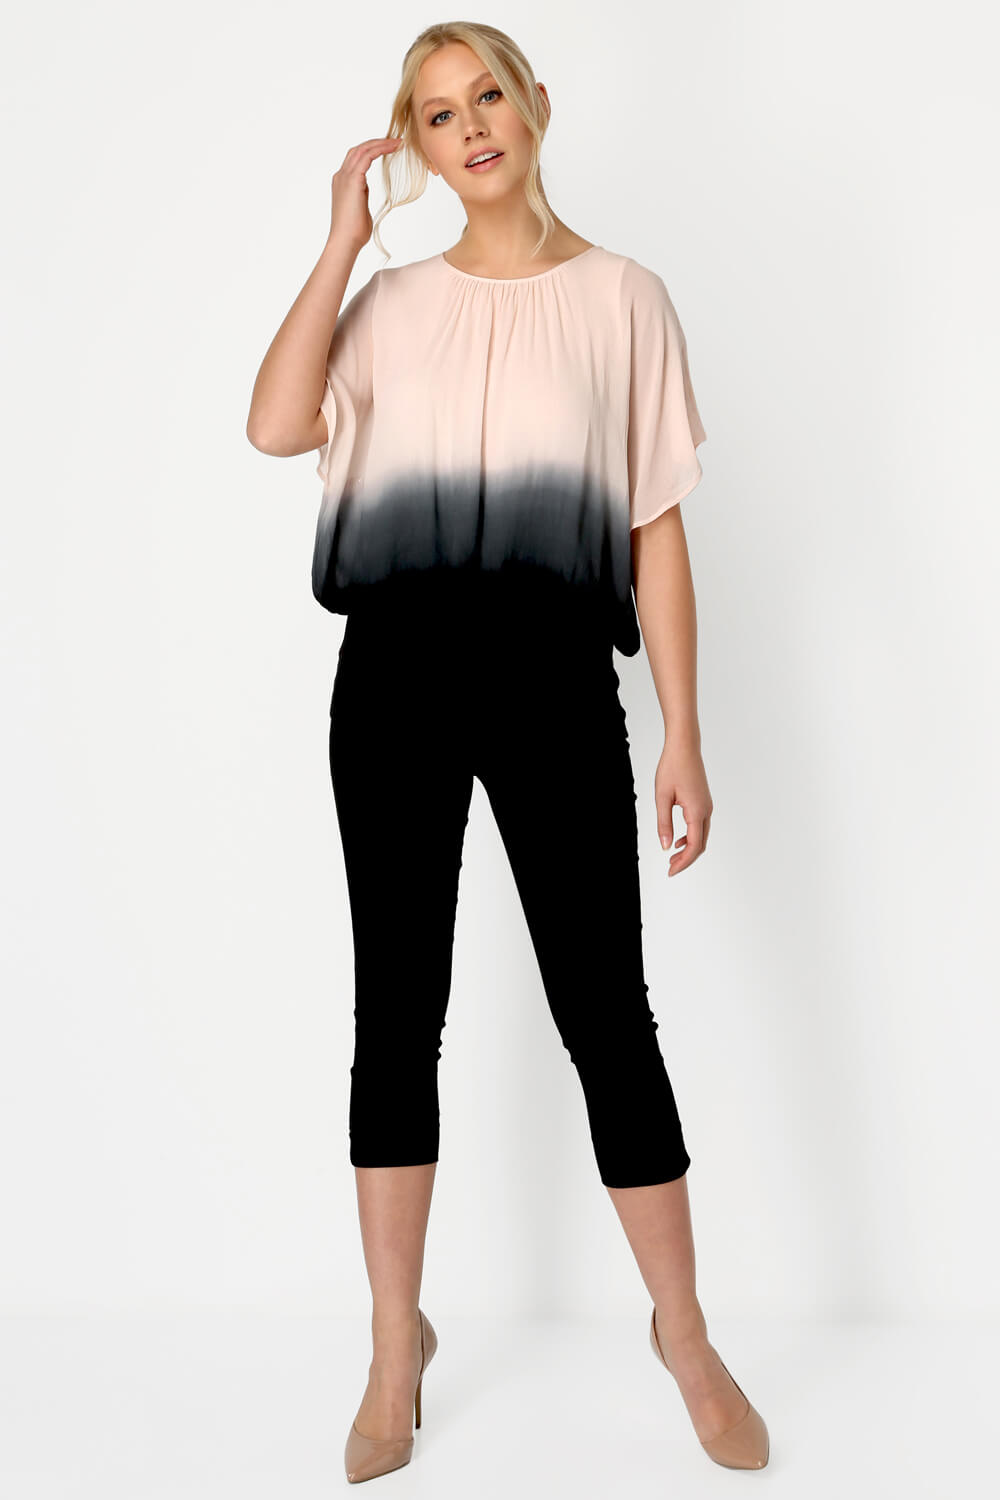 PINK Ombre Batwing Top, Image 2 of 8